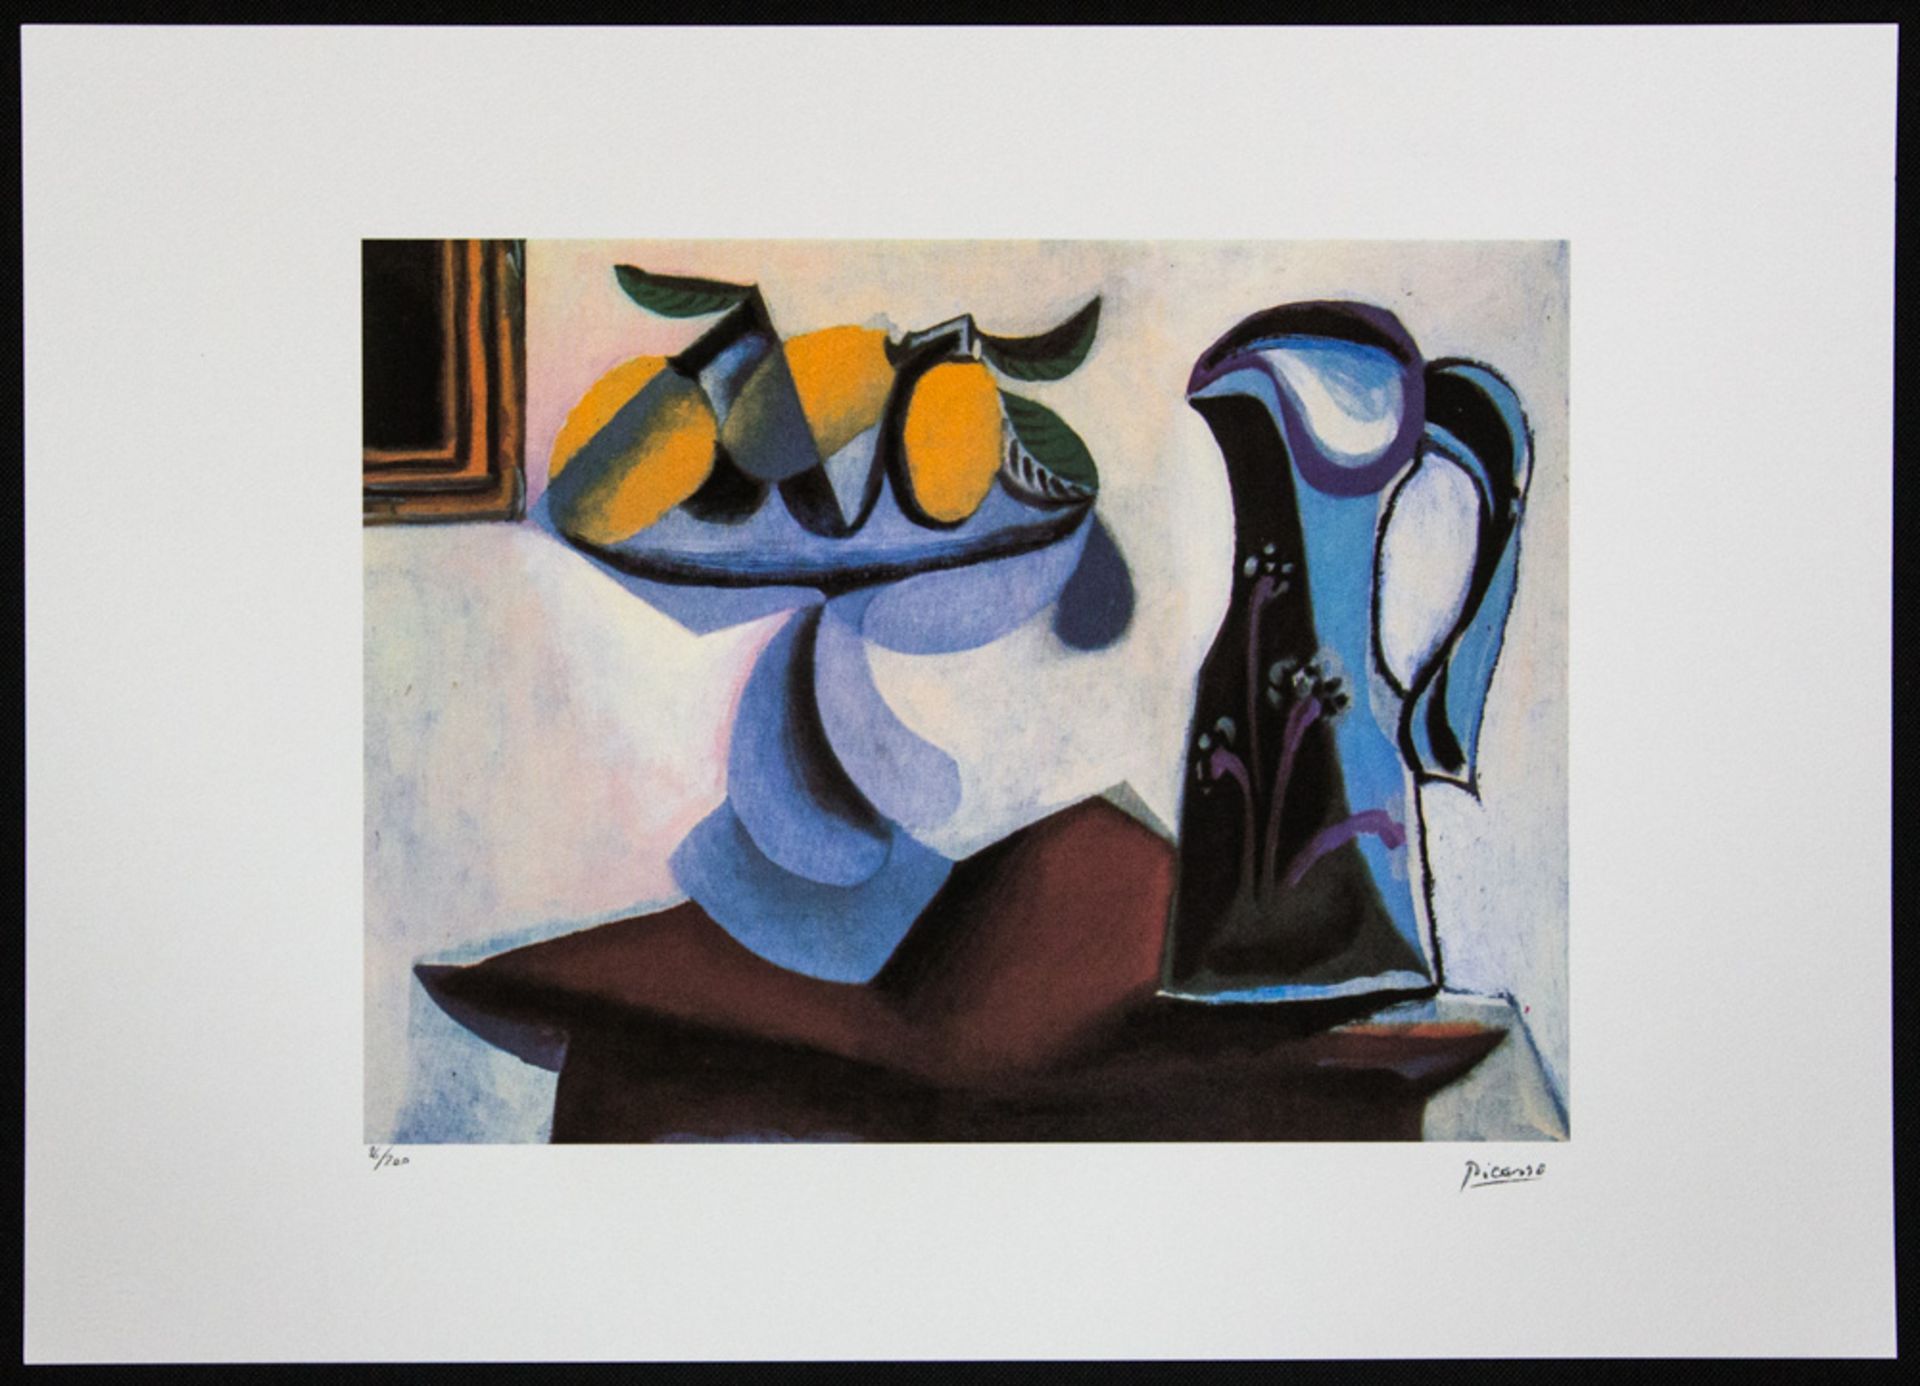 Pablo Picasso 'Still Life with Lemon and a Jug' - Image 2 of 6